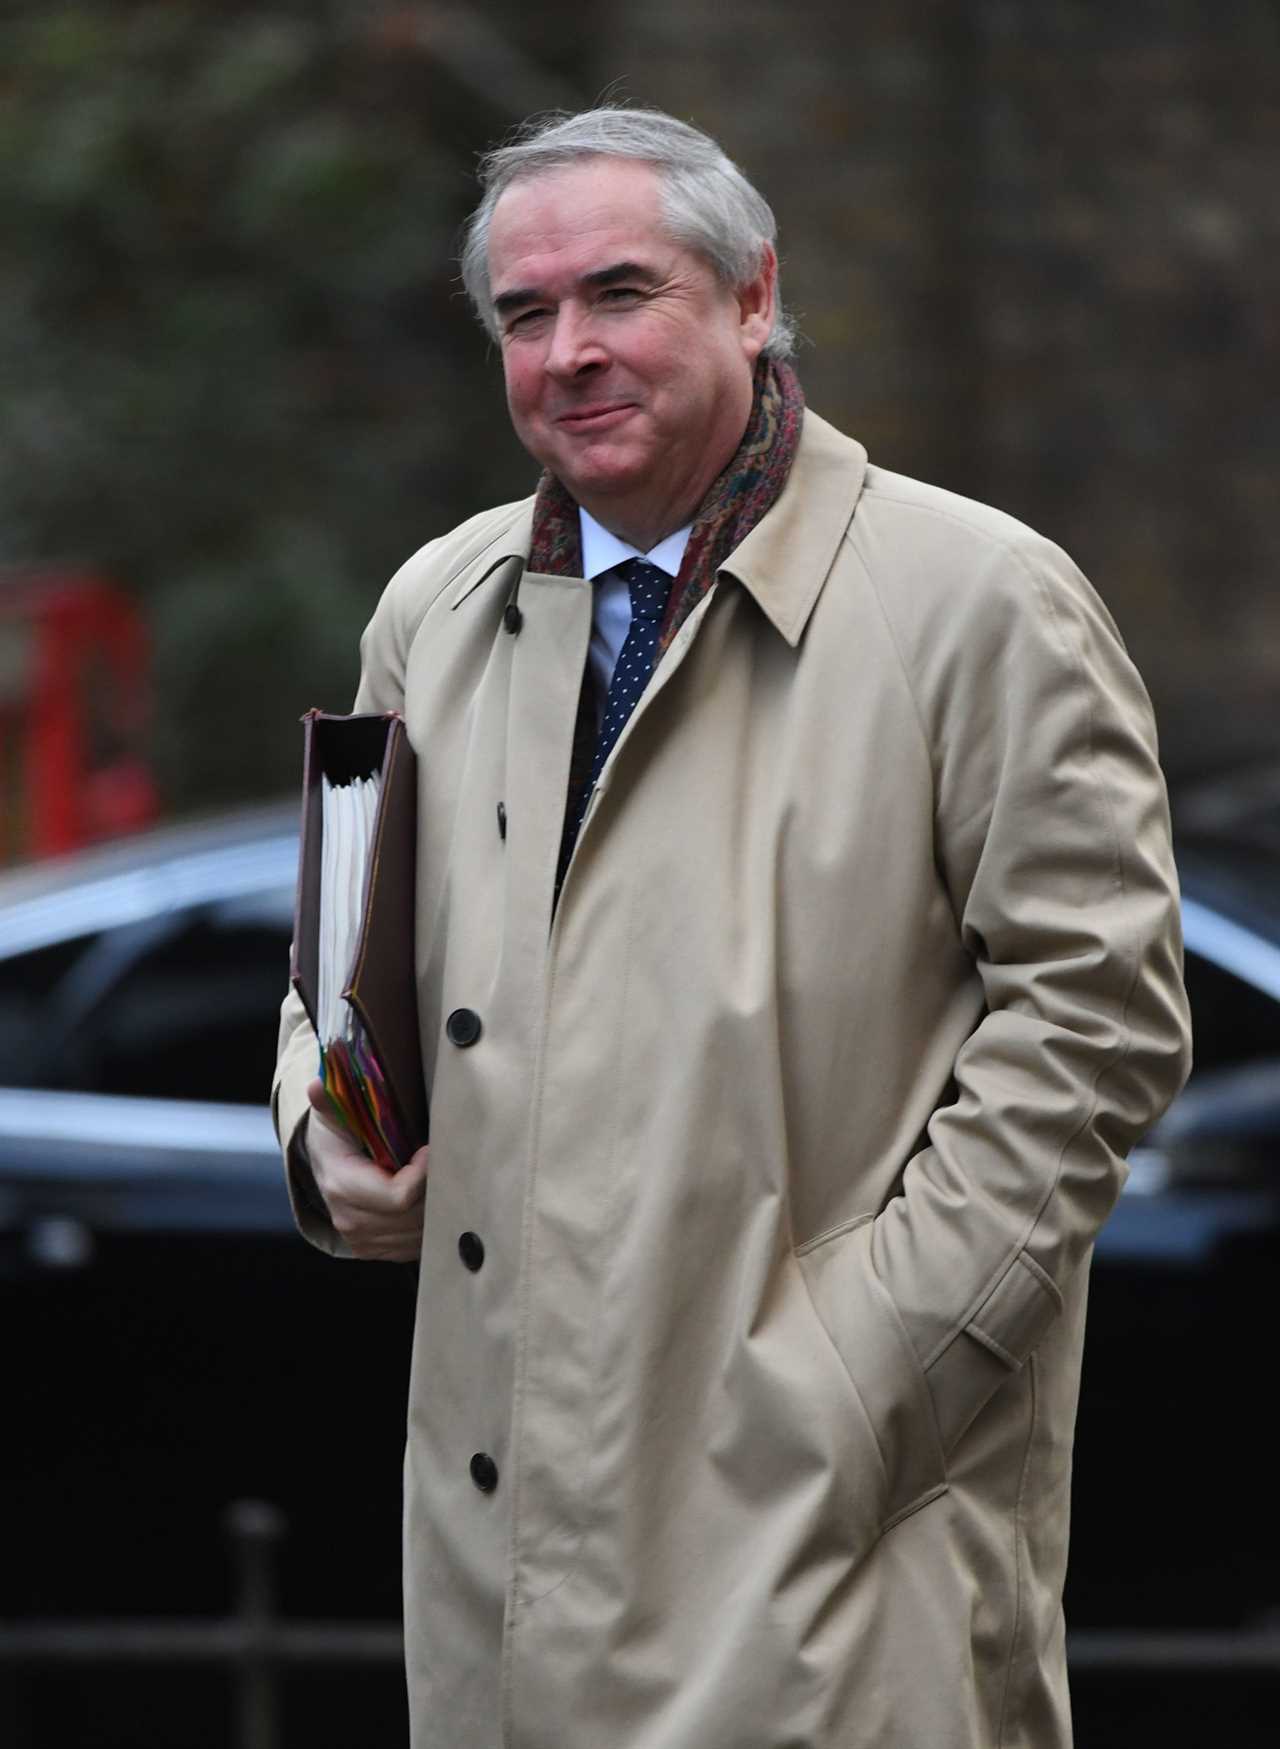 Sir Geoffrey Cox slammed for siding with ‘those accused of corruption’